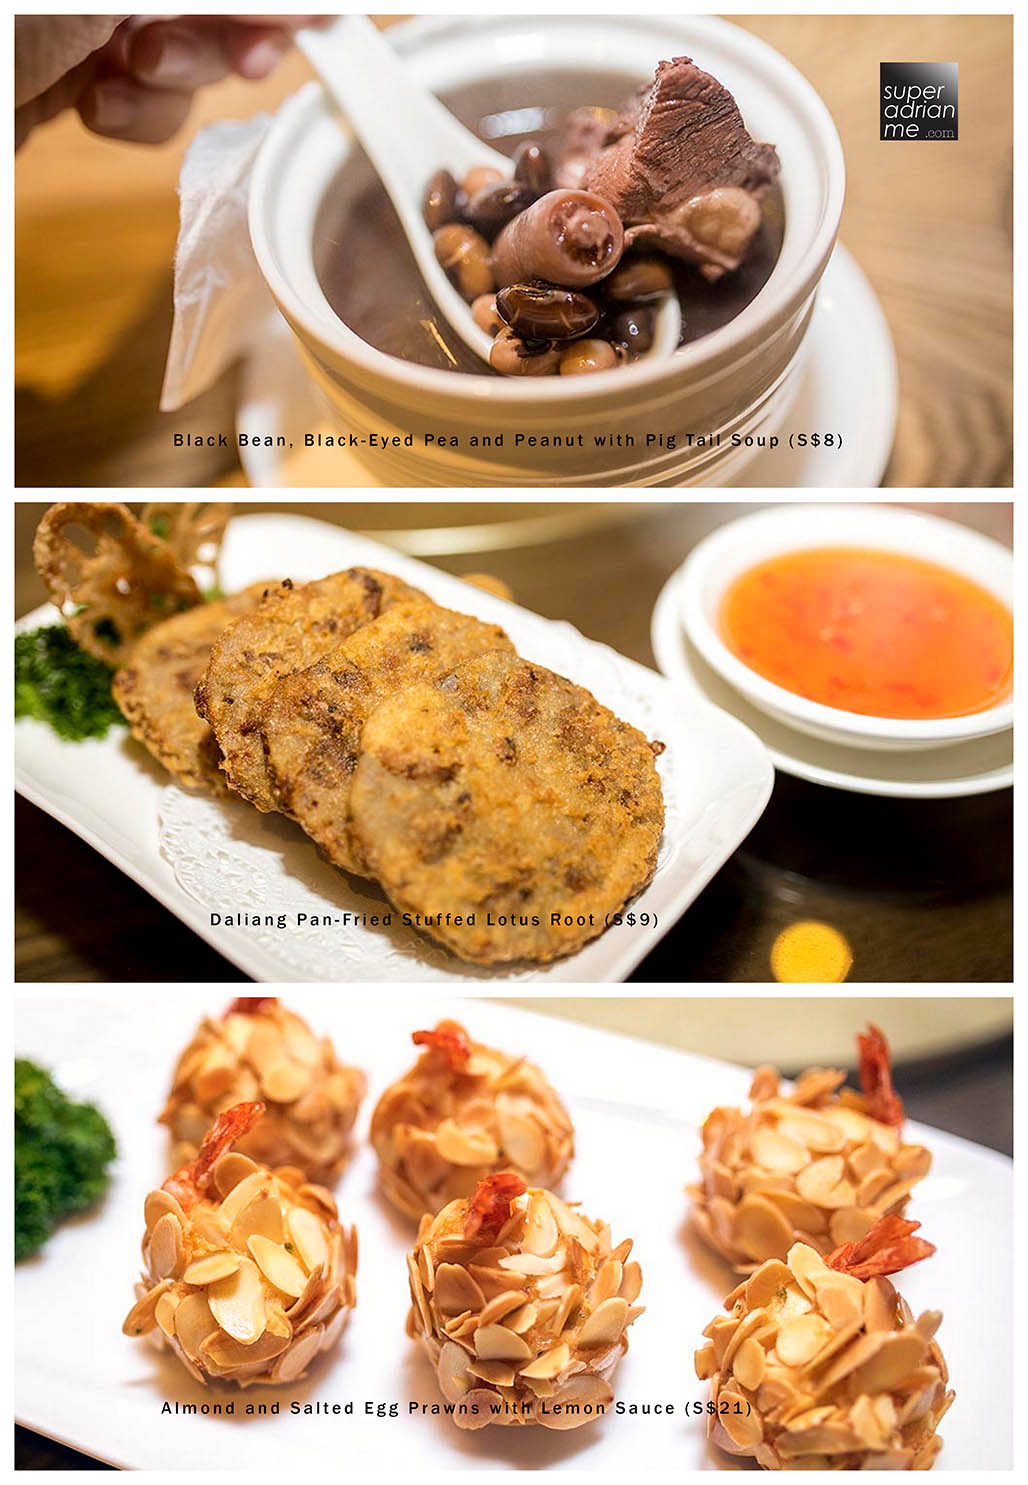 Joyden Canton - Soup, Pan-fried Stuffed Lotus Root and Almond and Salted Egg Prawns with Lemon Sauce